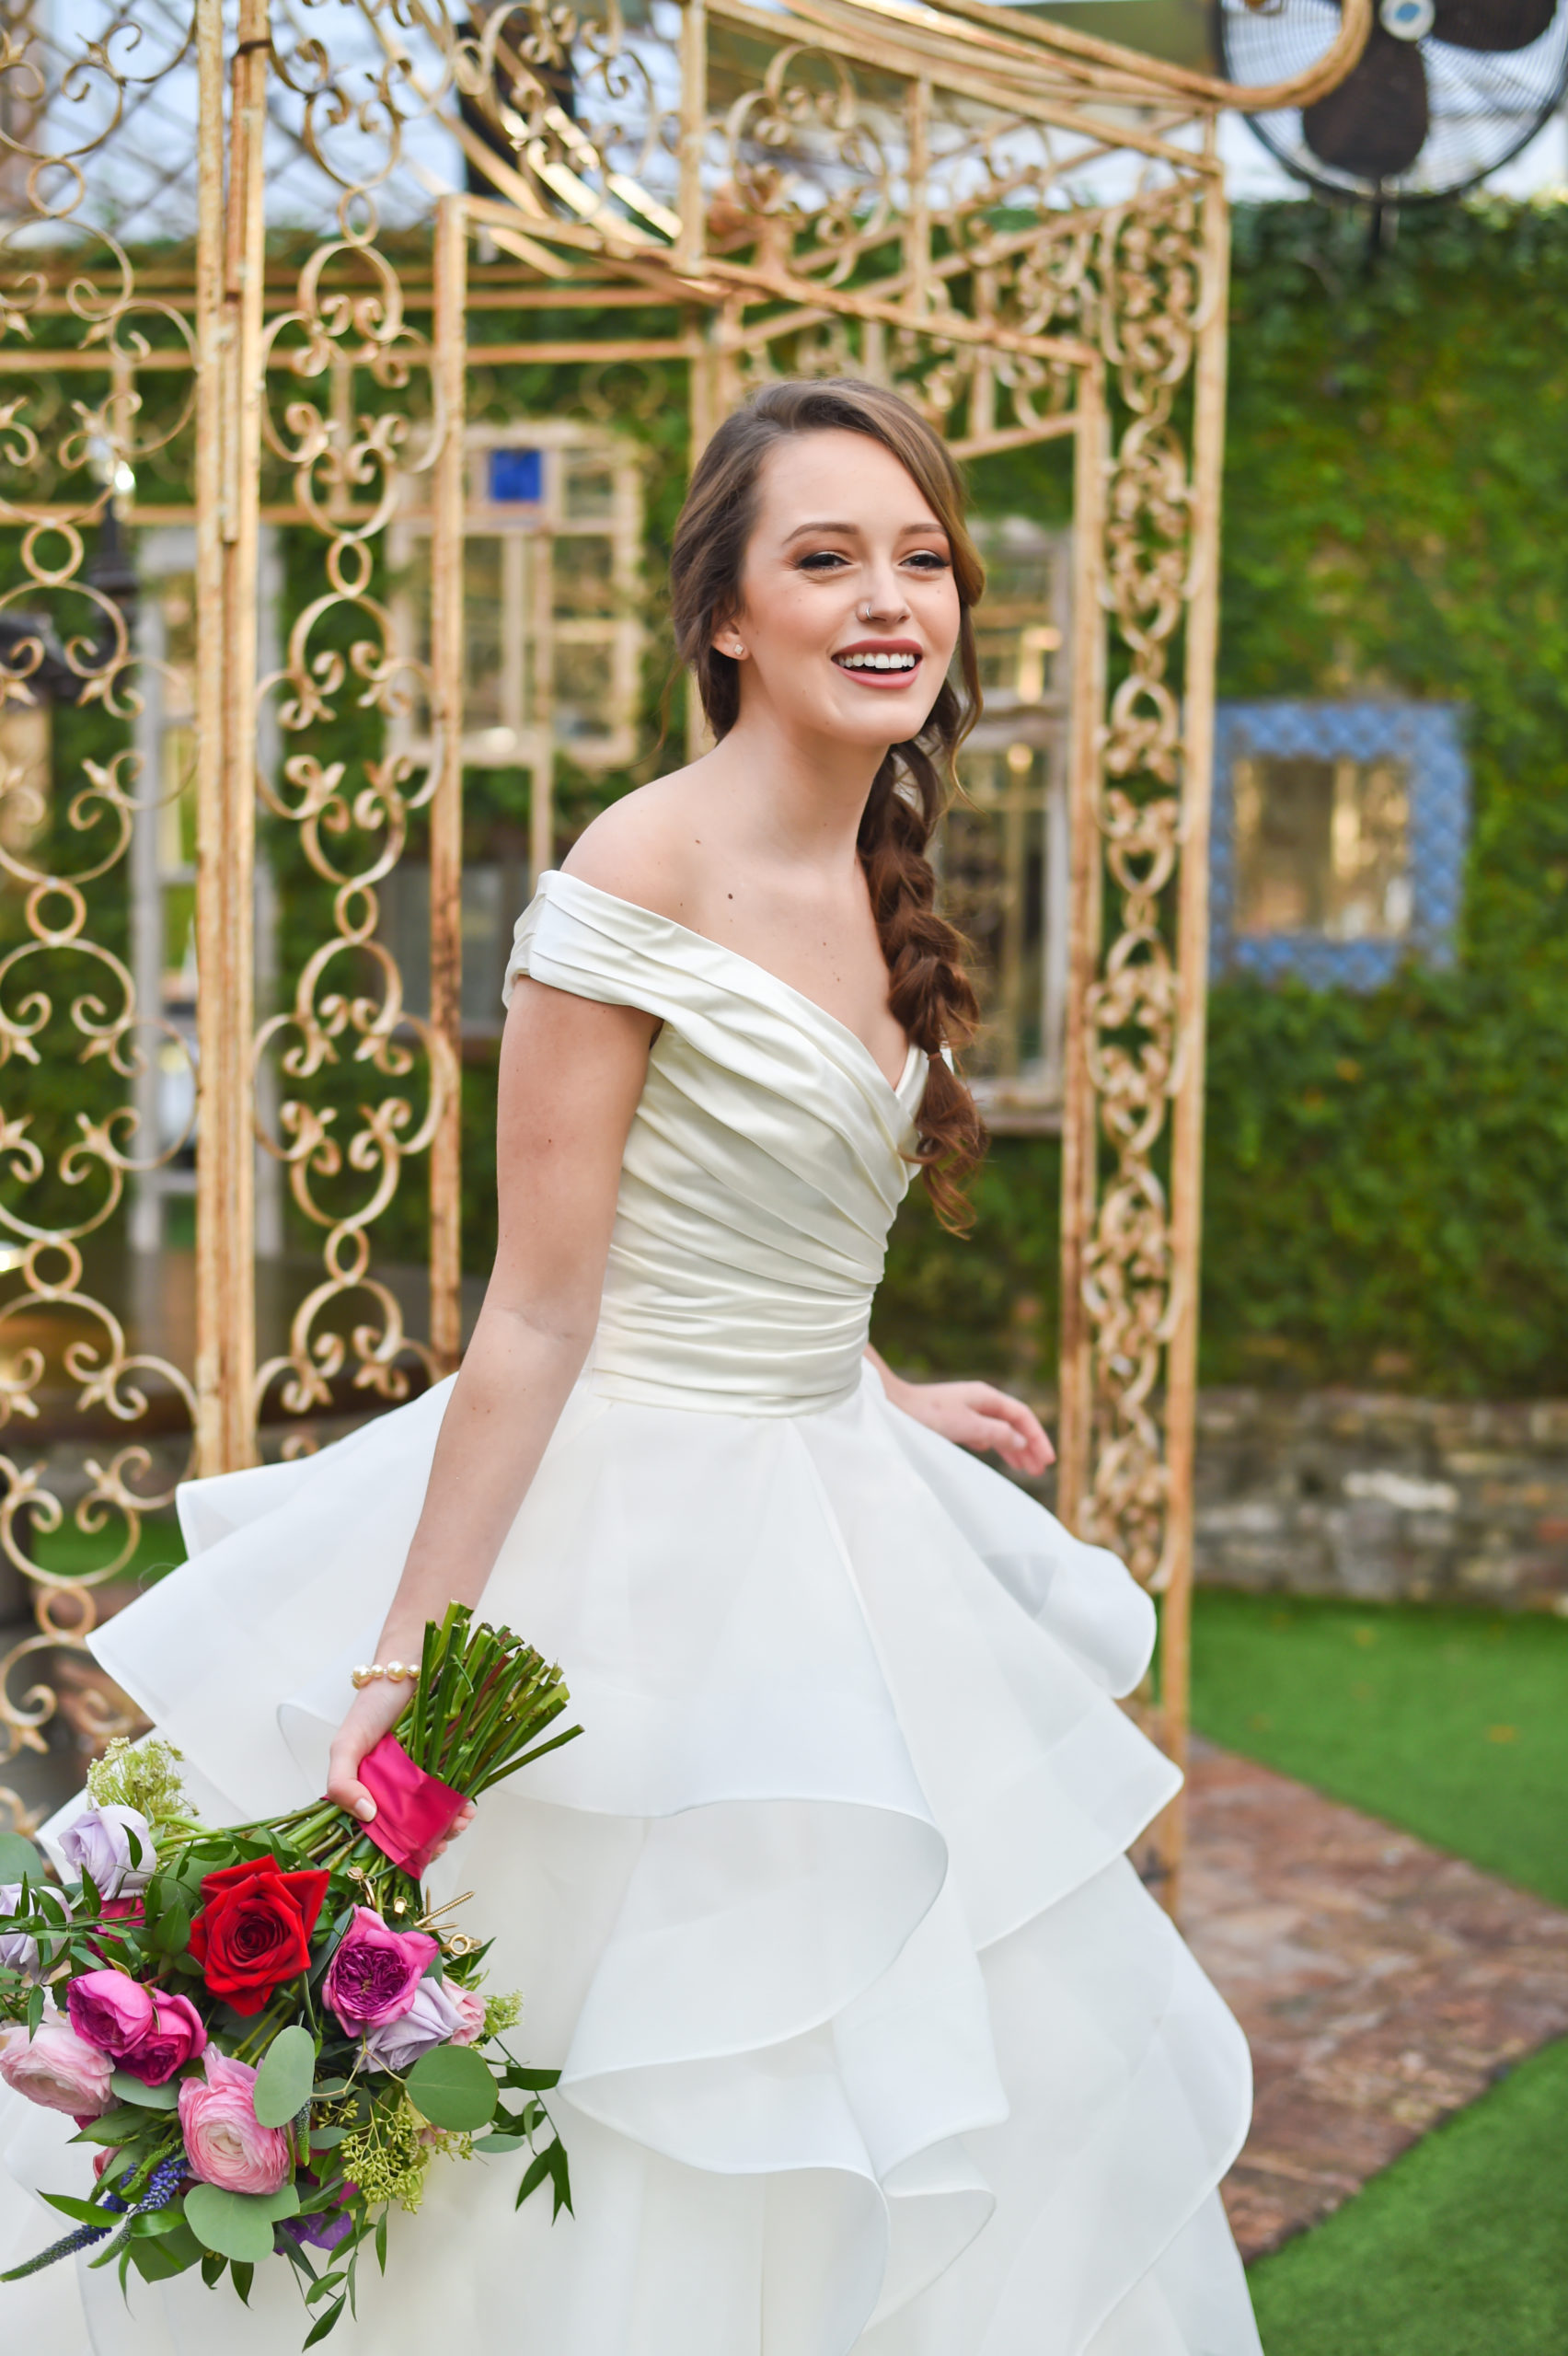 Need Disney wedding ideas for your perfect Disney princess wedding dress? The Maggie Sottero wedding gown was perfect for a Disney princess, she really looks like Belle!